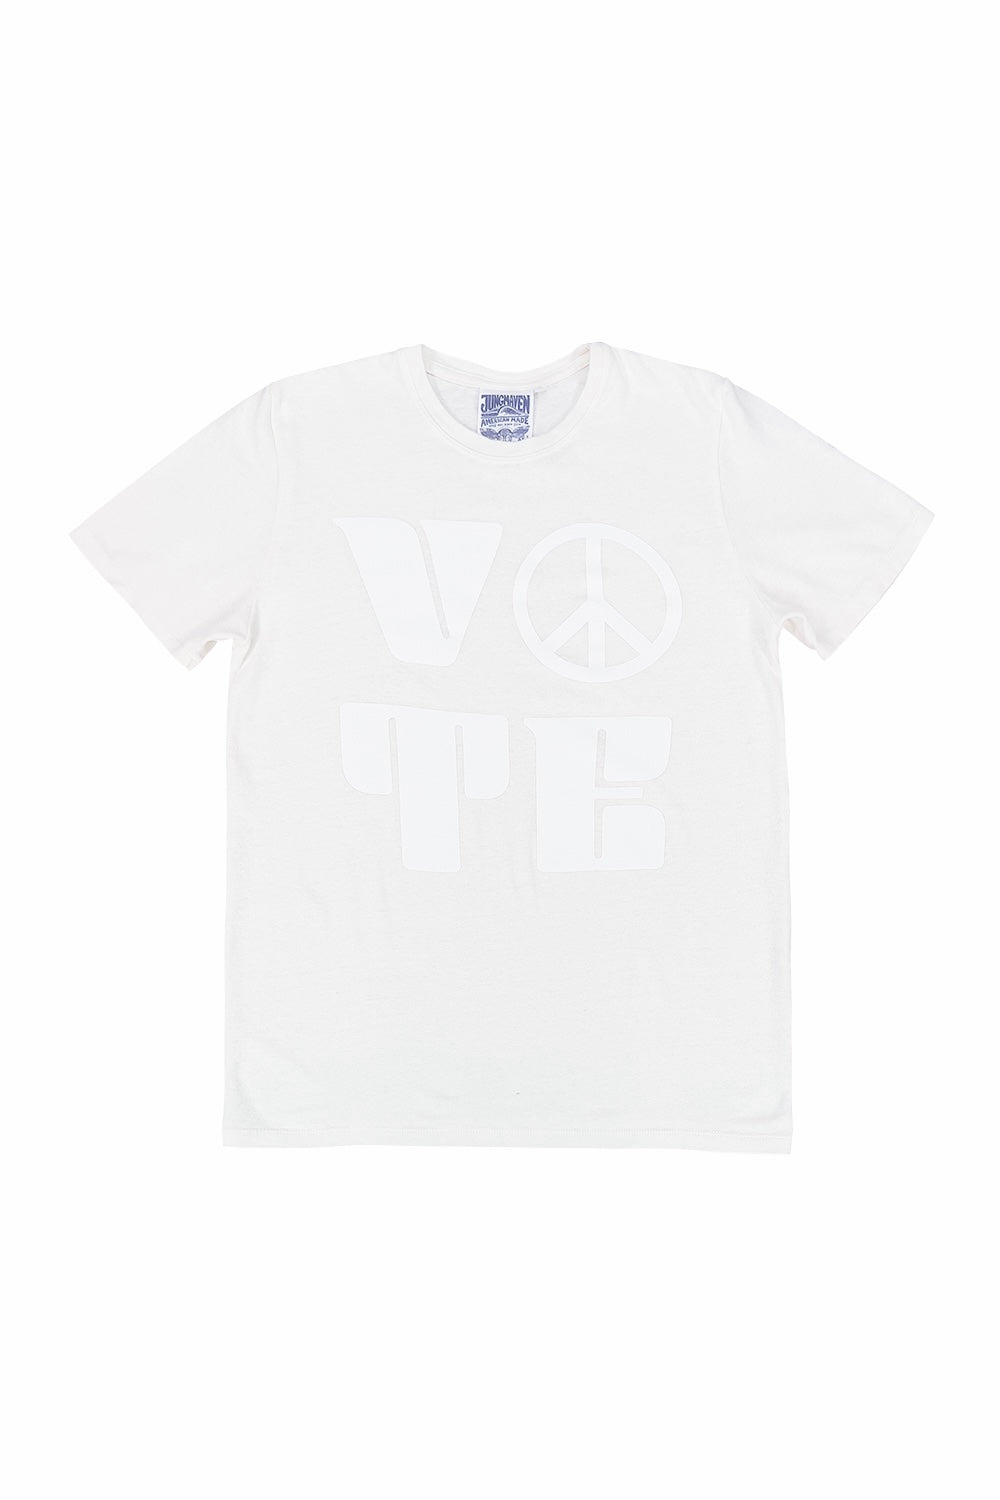 Vote Peace Baja Tee | Jungmaven Hemp Clothing & Accessories / Color:Washed White